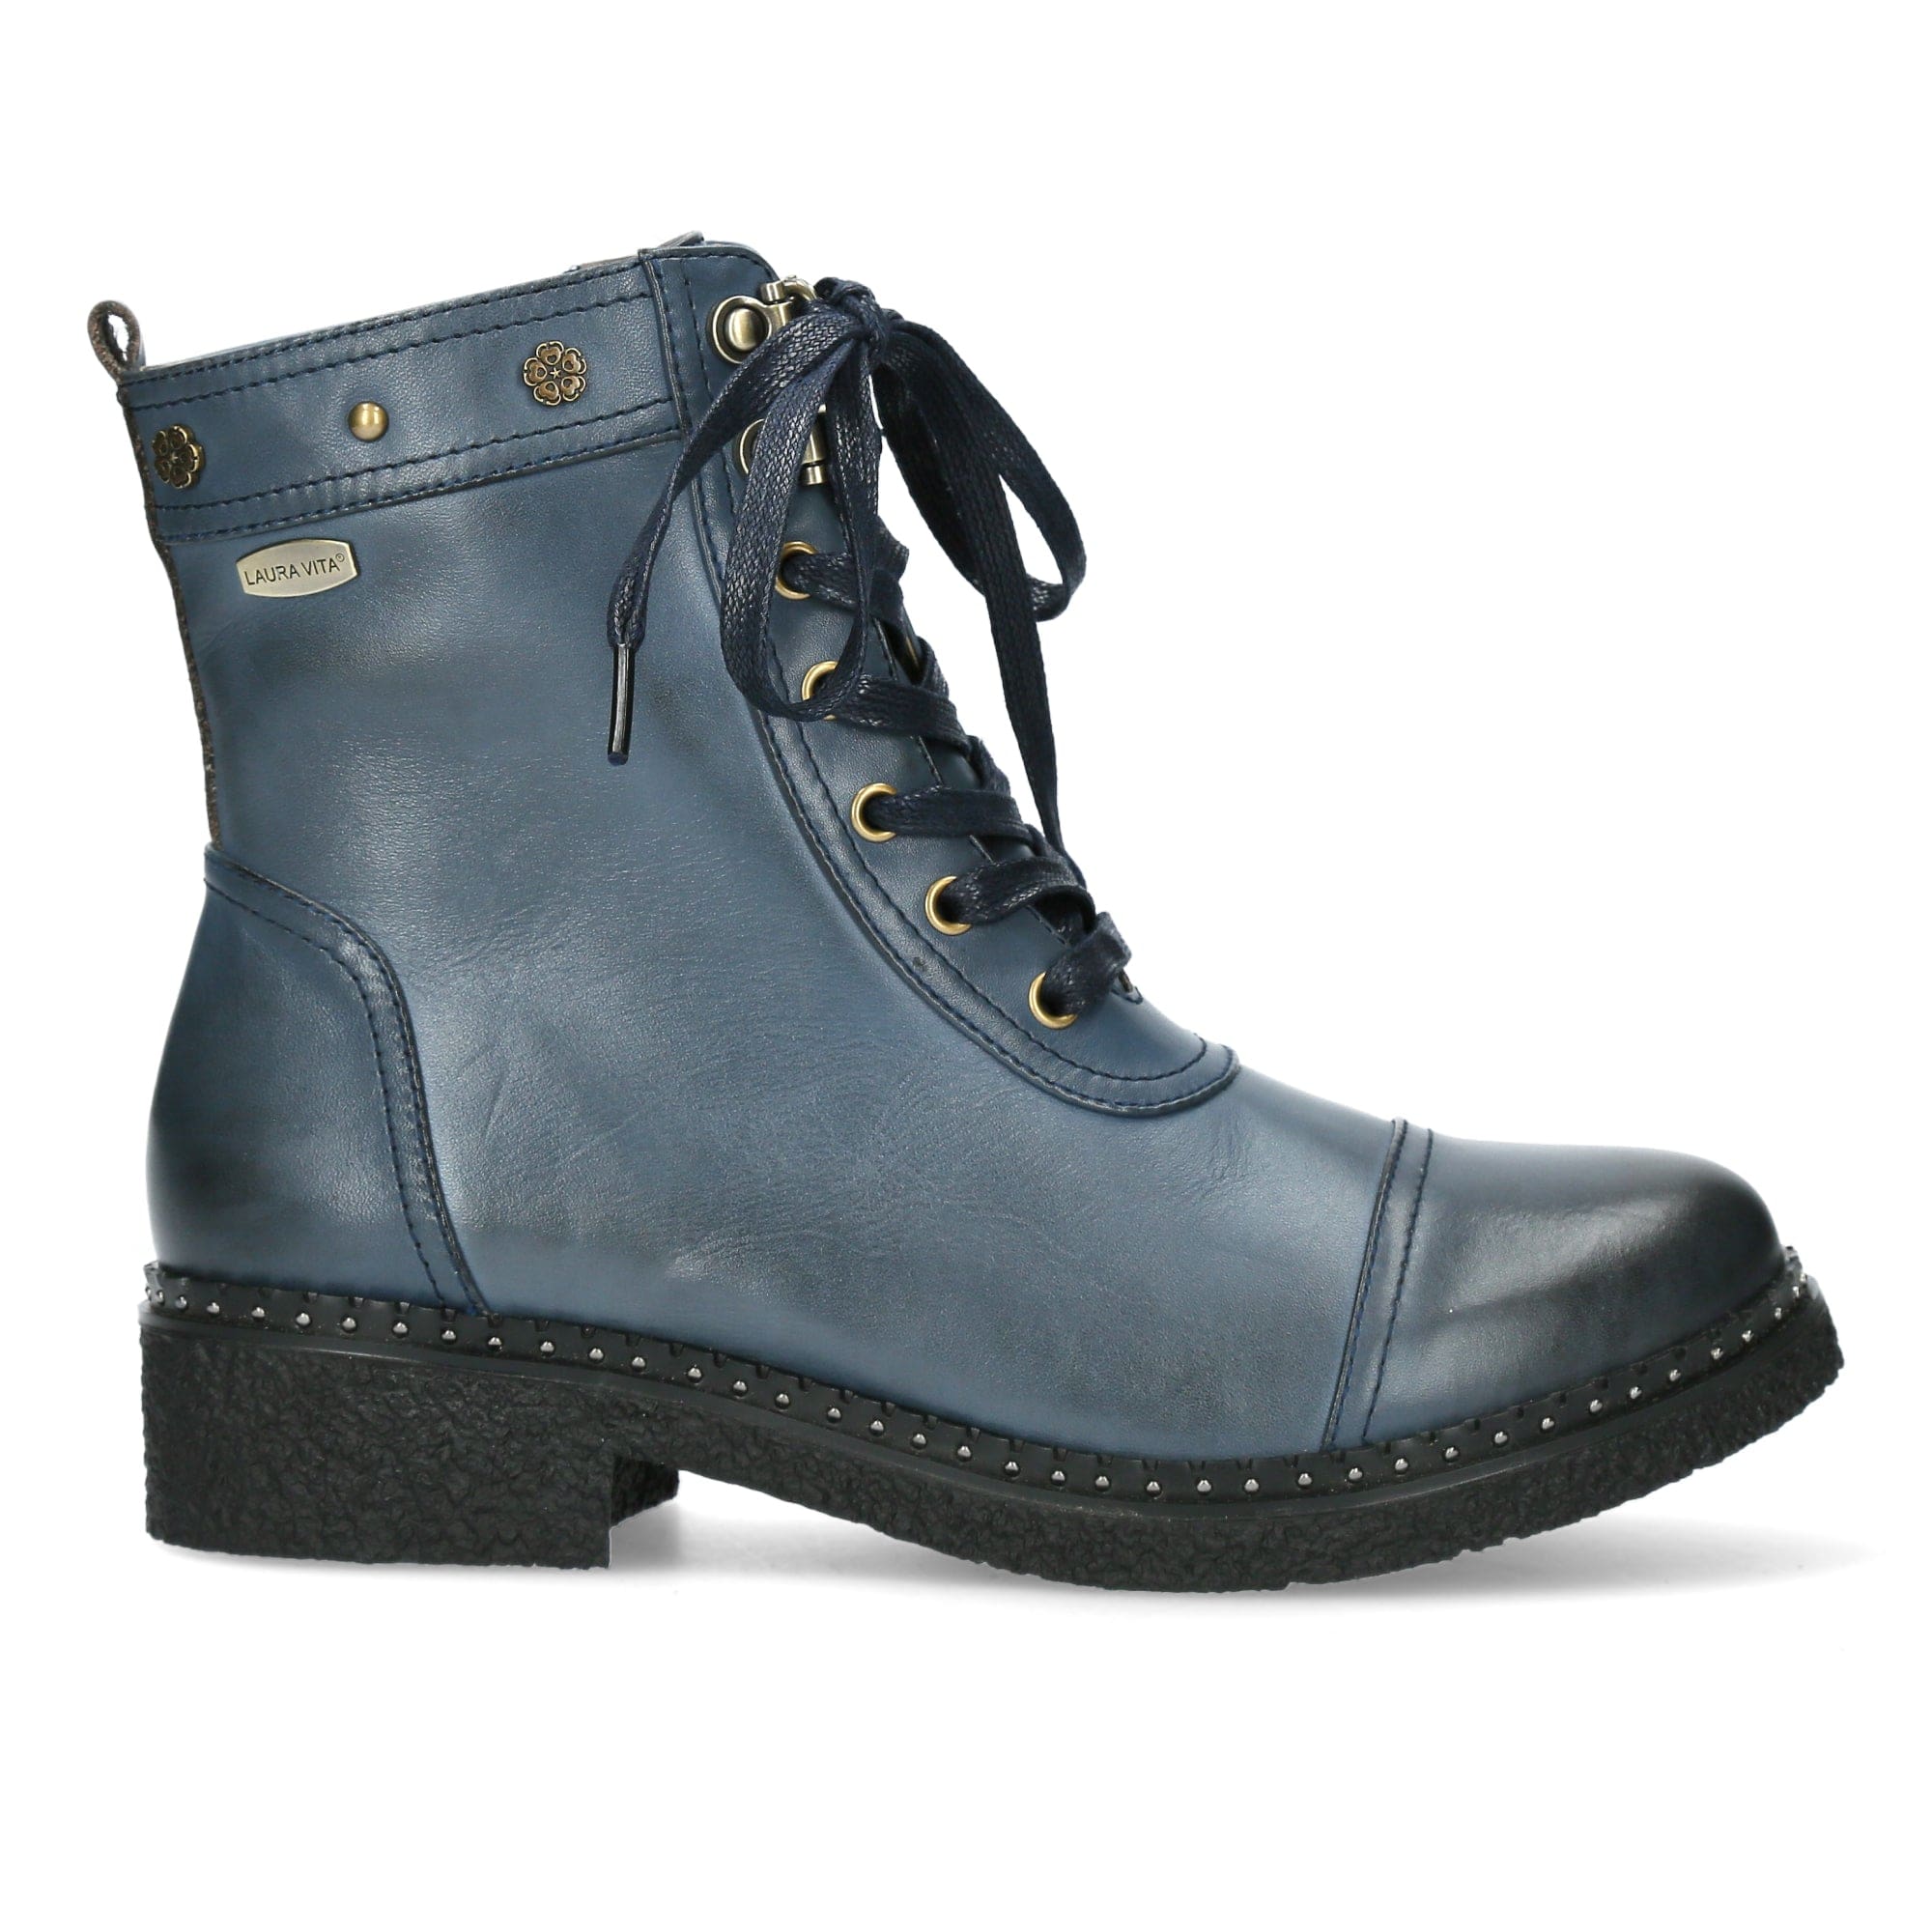 IDCITEO 02 - 35 / Jeans - Boots